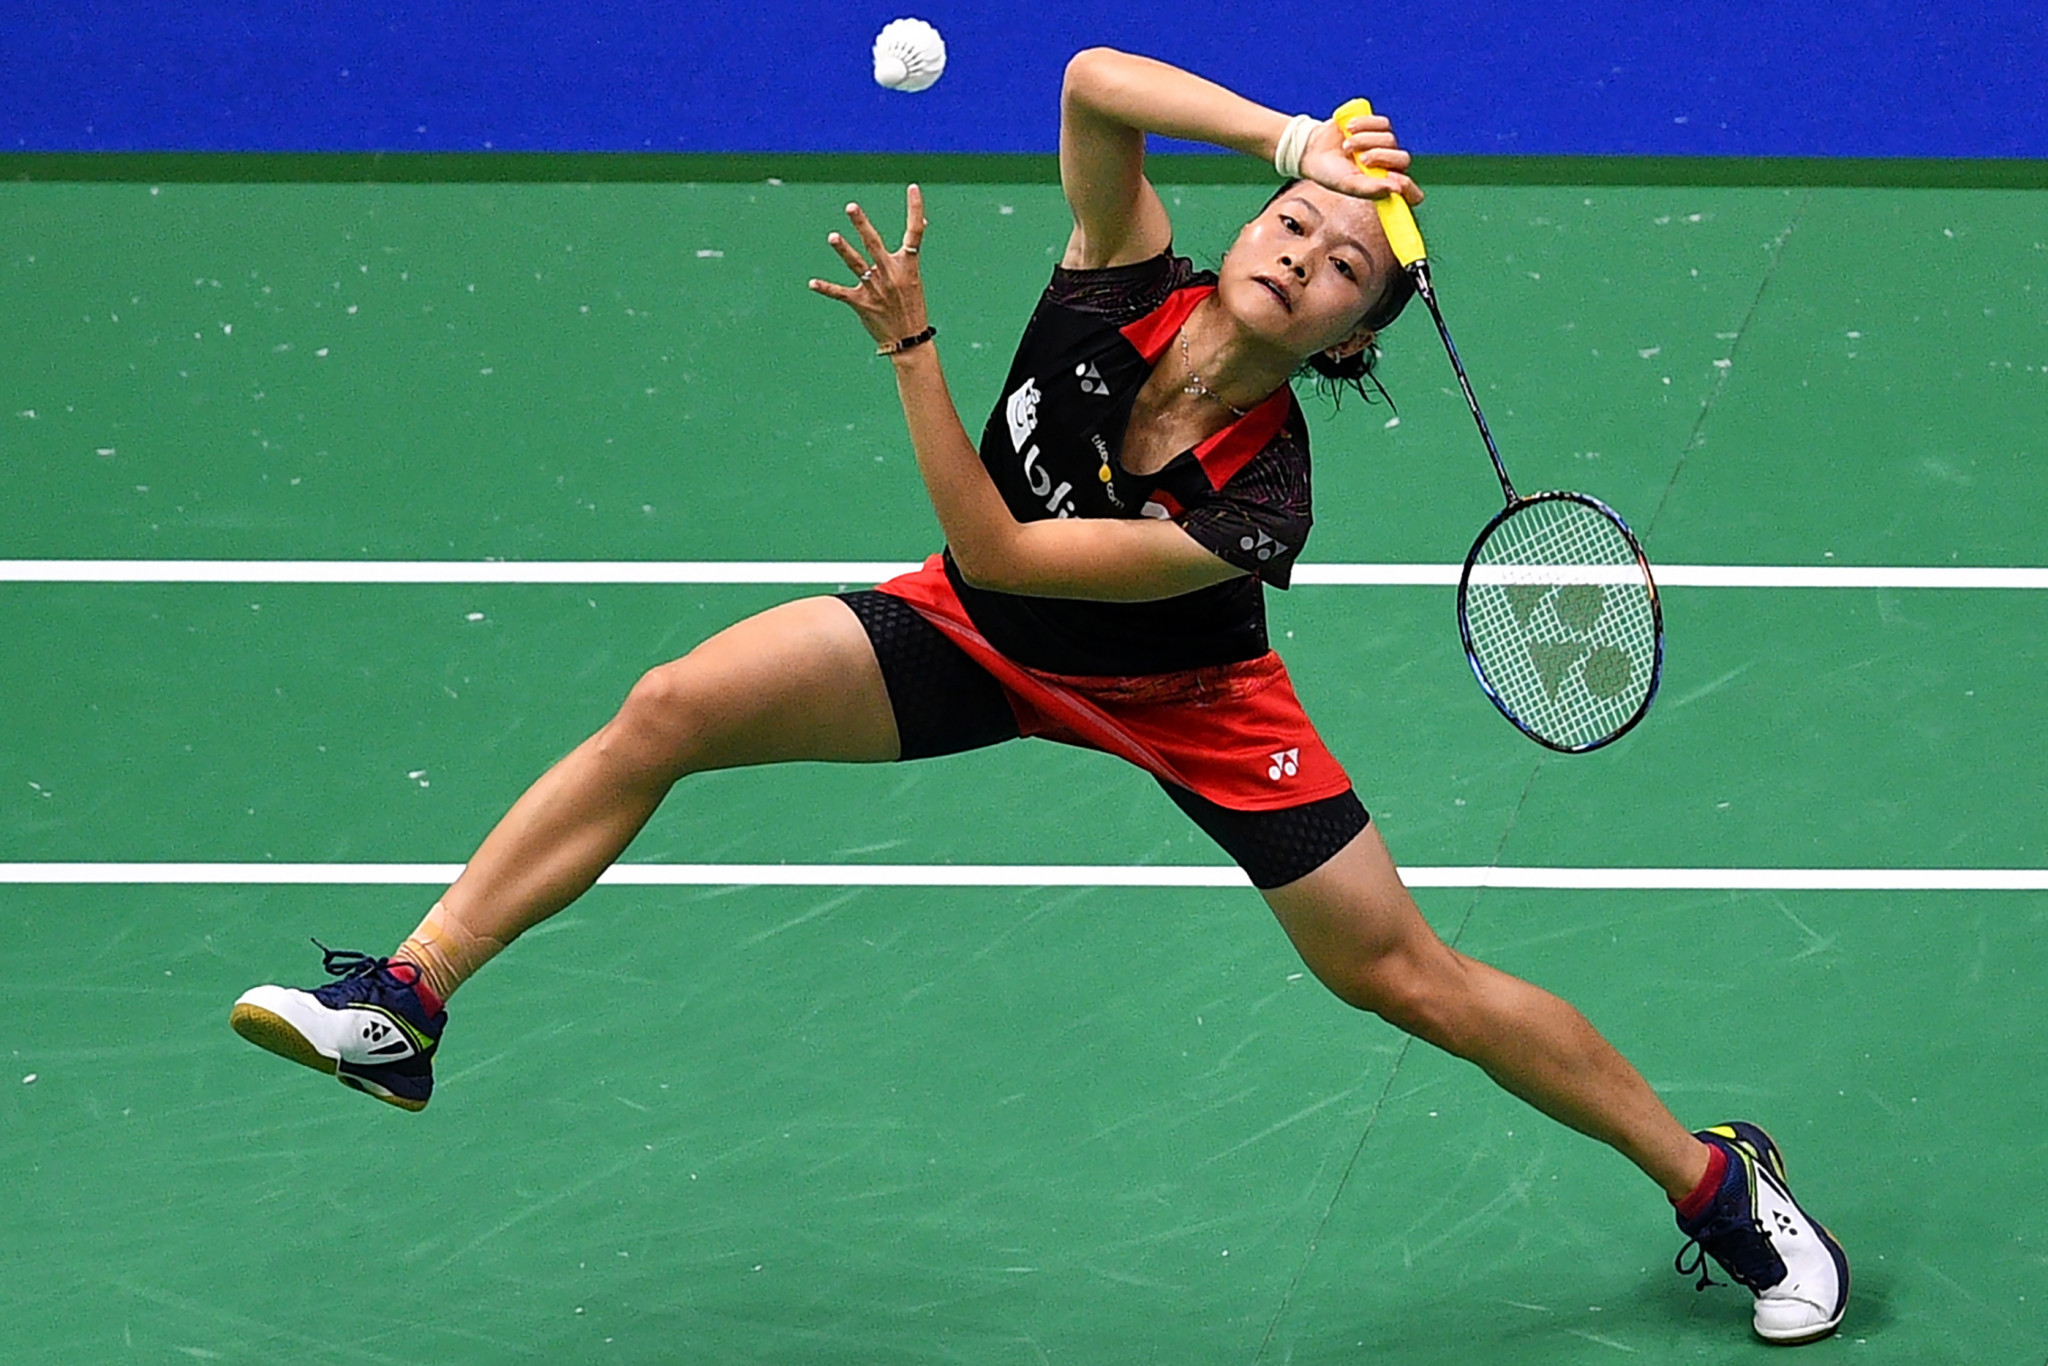 Indonesia's Fitriani Fitriani earned a place in the women's singles final ©Getty Images